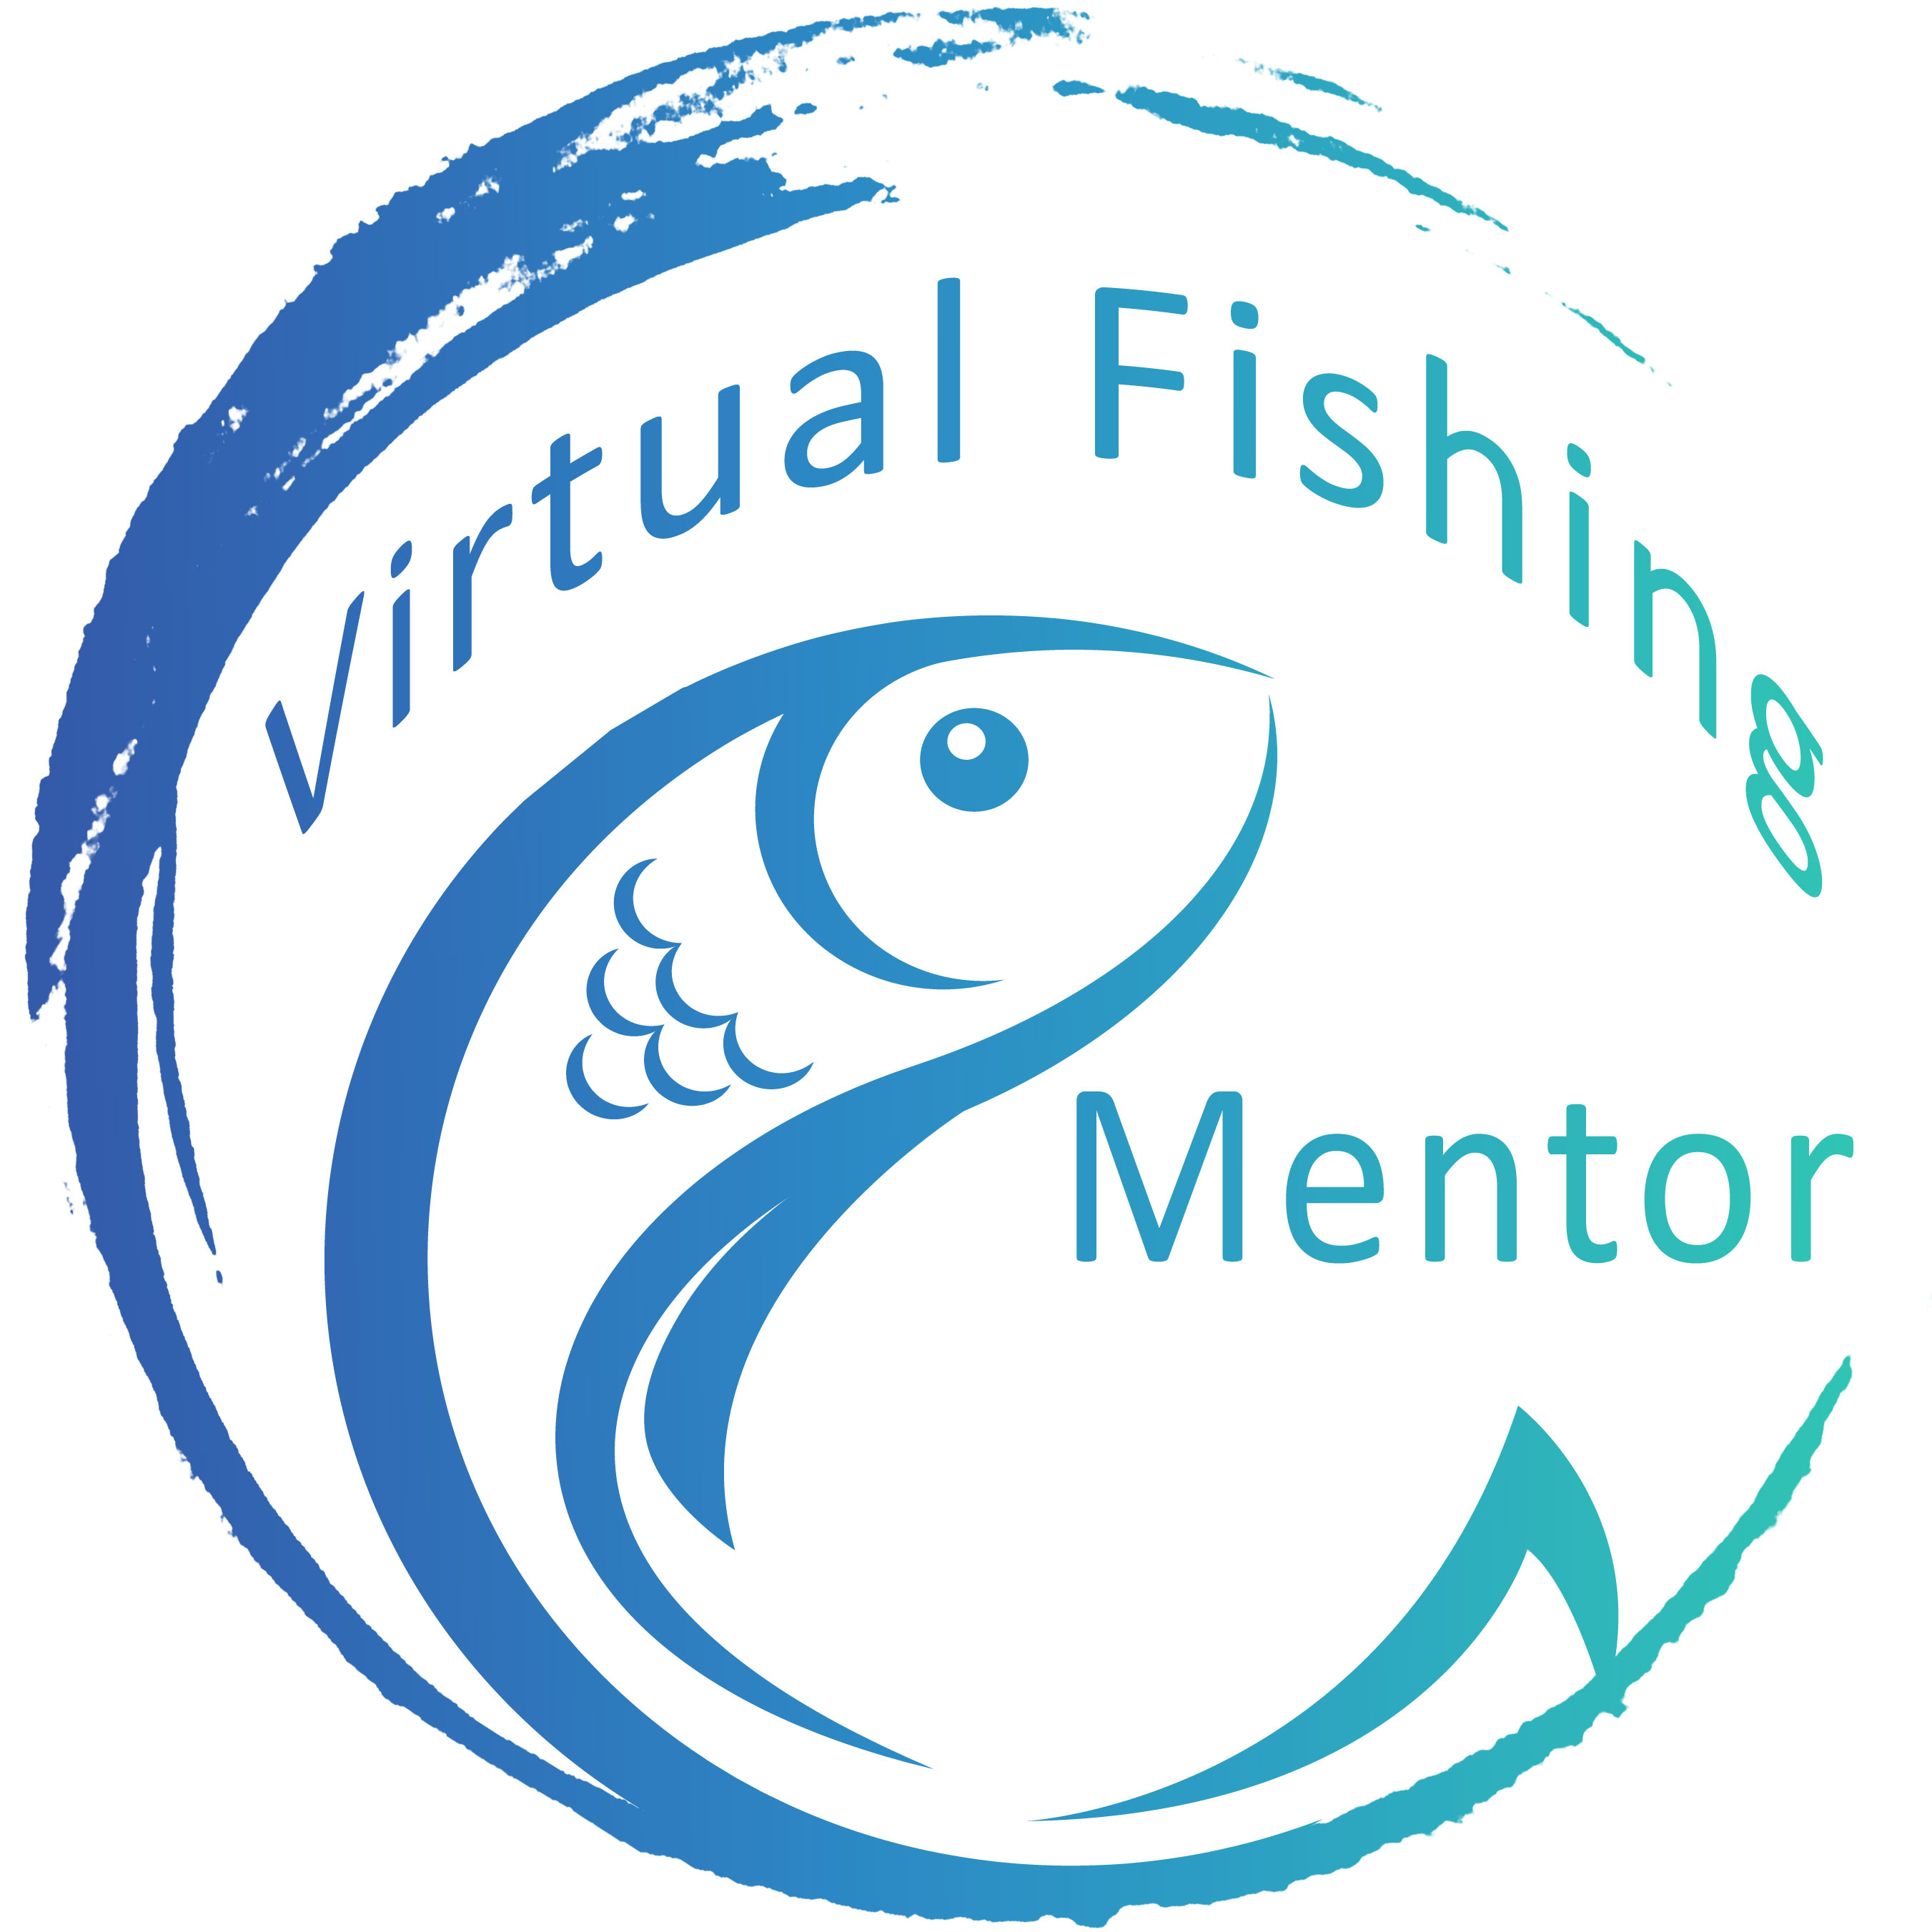 Stylized fish with text Virtual Fishing Mentor by it